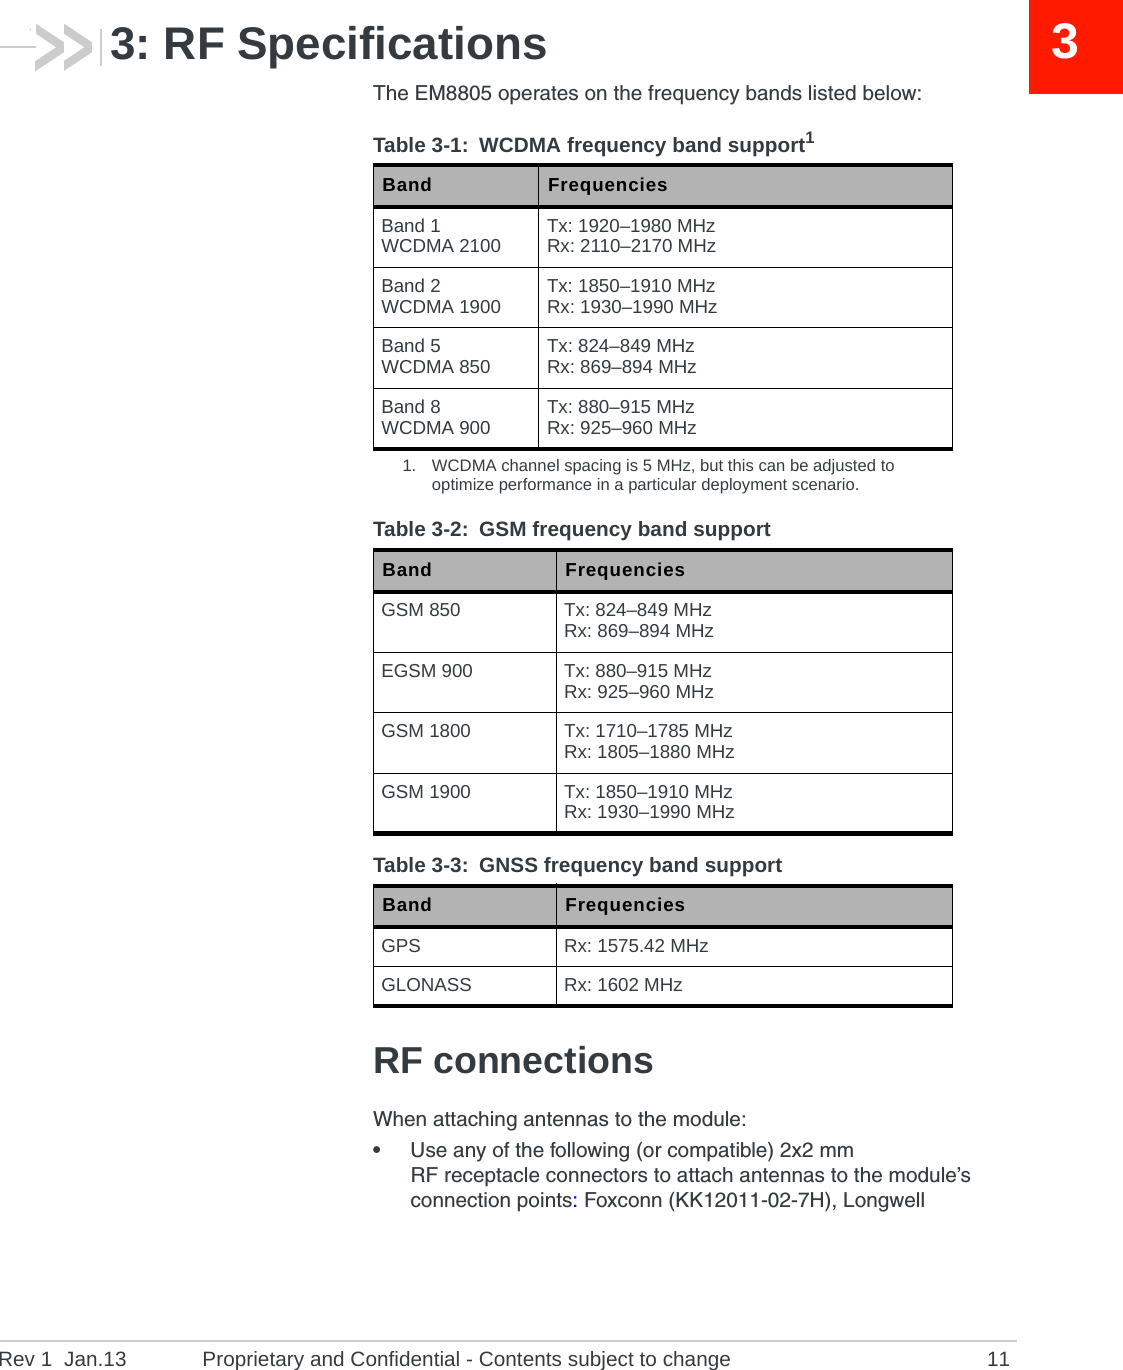 Rev 1  Jan.13 Proprietary and Confidential - Contents subject to change 1133: RF SpecificationsThe EM8805 operates on the frequency bands listed below:       RF connectionsWhen attaching antennas to the module:•Use any of the following (or compatible) 2x2 mm RF receptacle connectors to attach antennas to the module’s connection points: Foxconn (KK12011-02-7H), Longwell Table 3-1: WCDMA frequency band support11. WCDMA channel spacing is 5 MHz, but this can be adjusted to optimize performance in a particular deployment scenario.Band FrequenciesBand 1WCDMA 2100 Tx: 1920–1980 MHzRx: 2110–2170 MHzBand 2WCDMA 1900 Tx: 1850–1910 MHzRx: 1930–1990 MHzBand 5WCDMA 850 Tx: 824–849 MHzRx: 869–894 MHzBand 8WCDMA 900 Tx: 880–915 MHzRx: 925–960 MHzTable 3-2: GSM frequency band support Band FrequenciesGSM 850 Tx: 824–849 MHzRx: 869–894 MHzEGSM 900 Tx: 880–915 MHzRx: 925–960 MHzGSM 1800 Tx: 1710–1785 MHzRx: 1805–1880 MHzGSM 1900 Tx: 1850–1910 MHzRx: 1930–1990 MHzTable 3-3: GNSS frequency band support Band FrequenciesGPS Rx: 1575.42 MHzGLONASS Rx: 1602 MHz